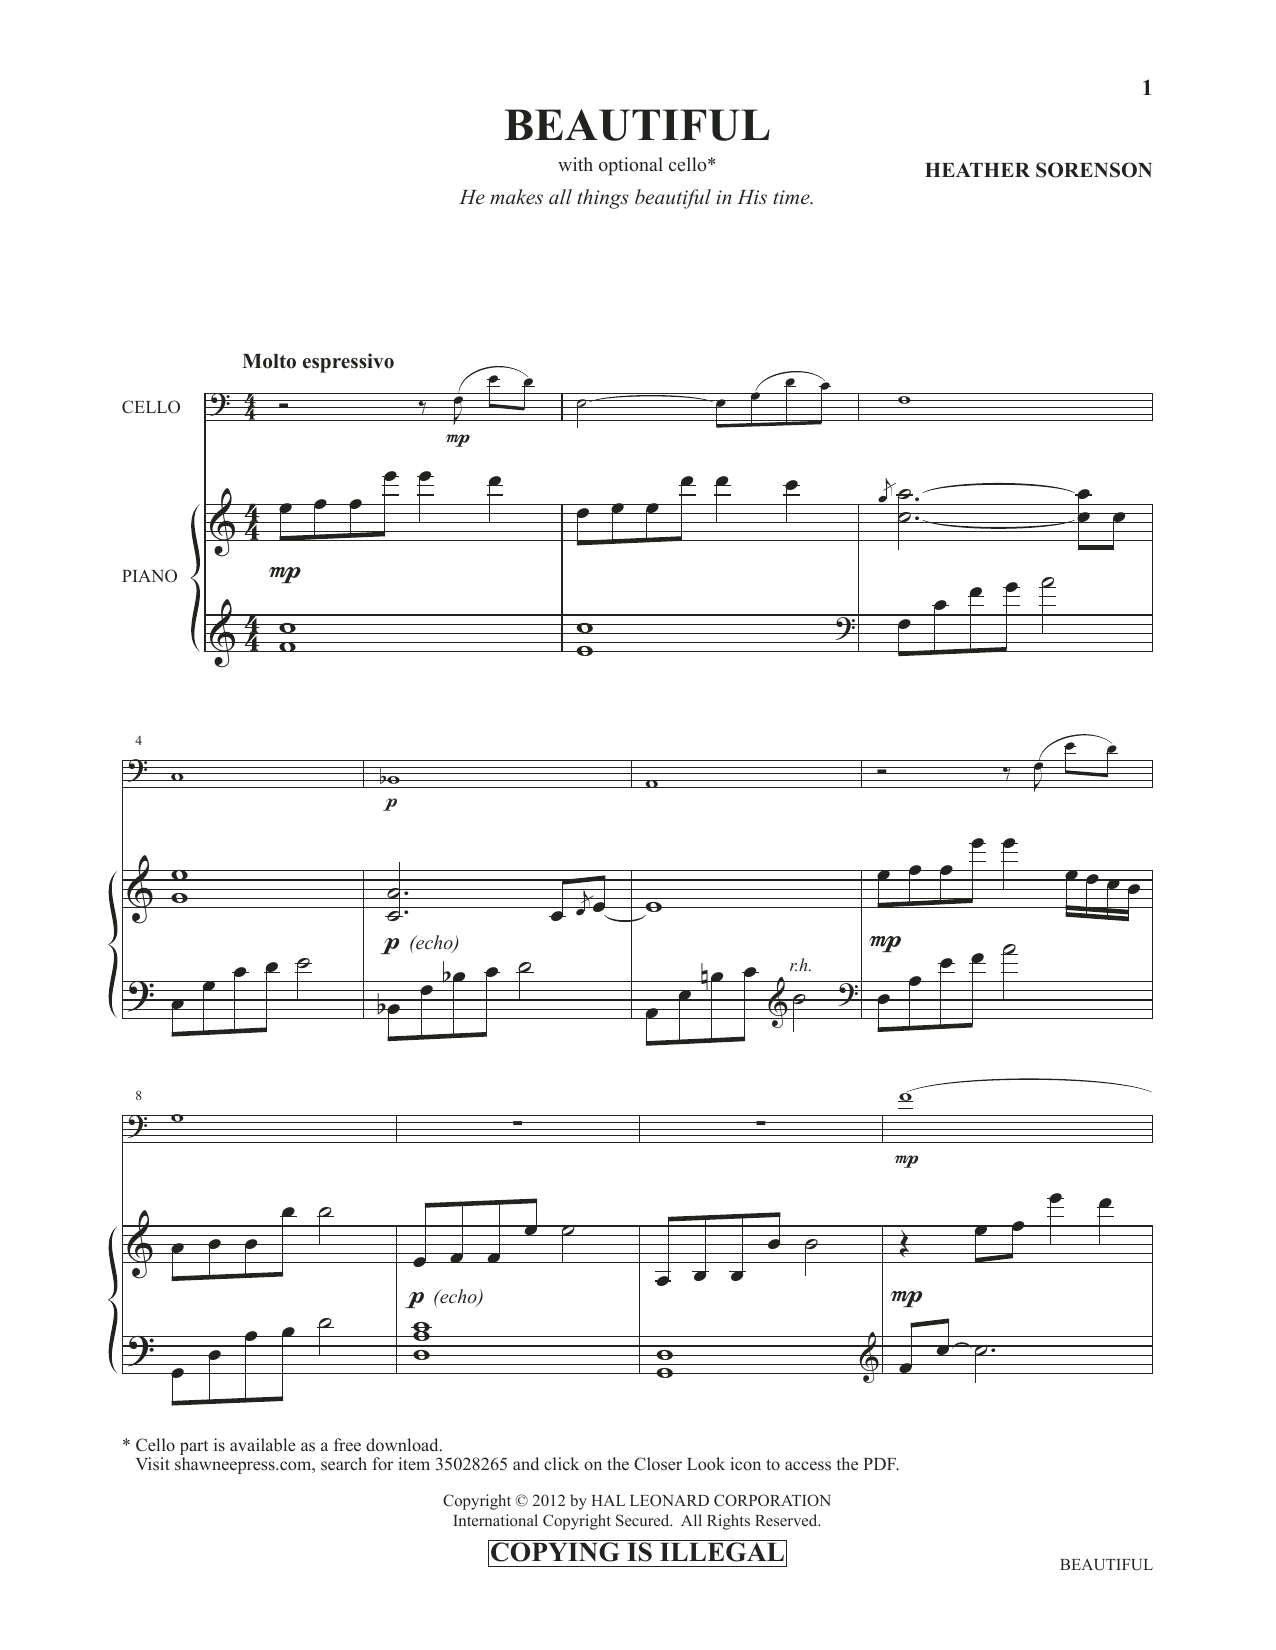 Download Heather Sorenson Beautiful (from Images: Sacred Piano Re Sheet Music